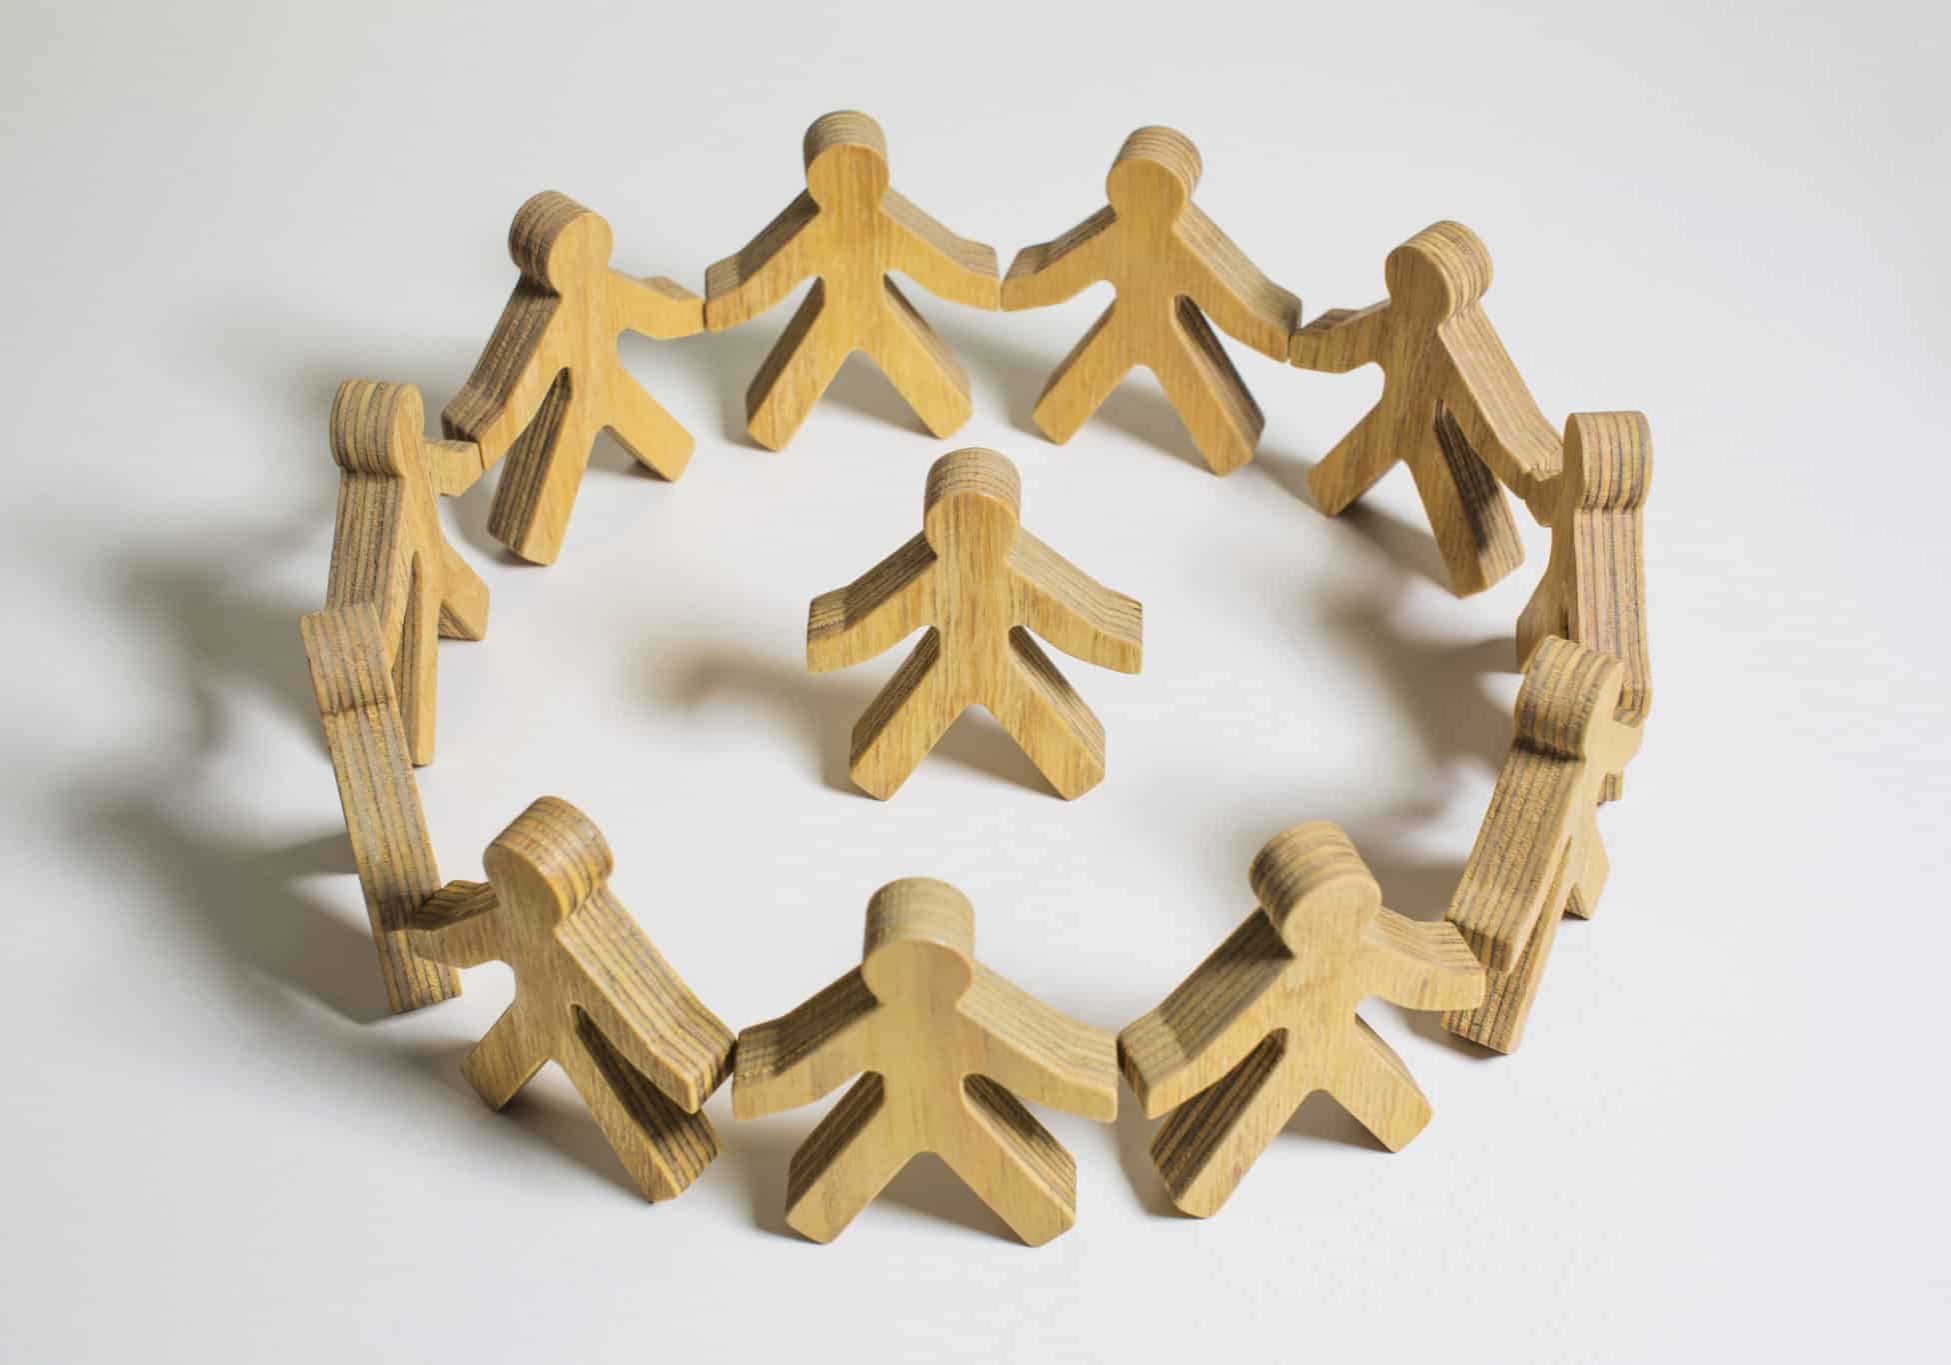 Wooden Model Men In A Circle, One In Centre